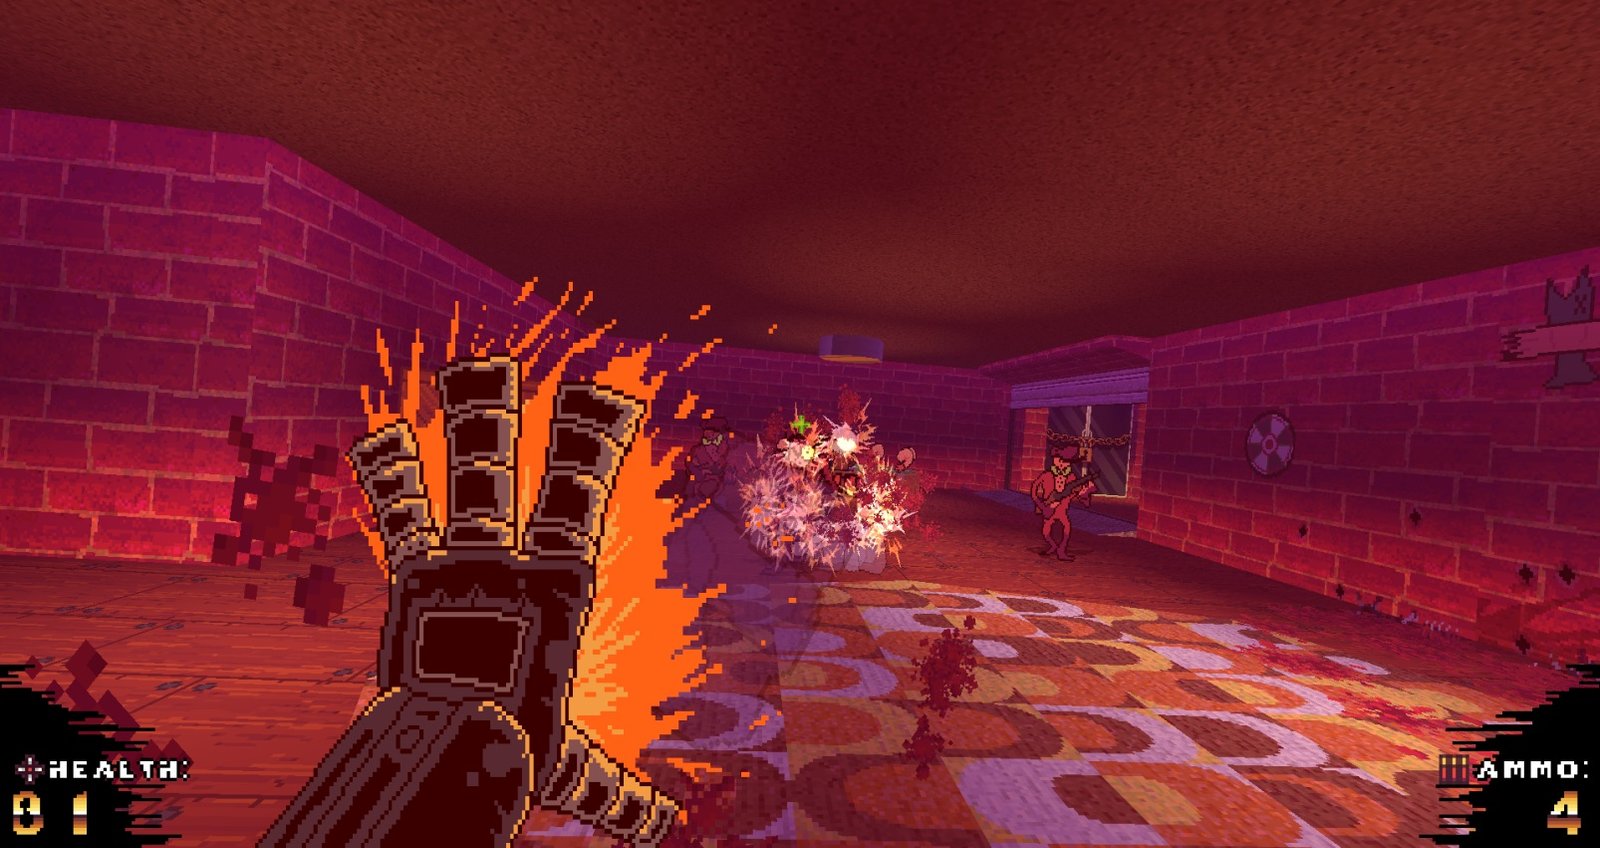 gameplay with fire coming from hand in dark lit room attacking enemies